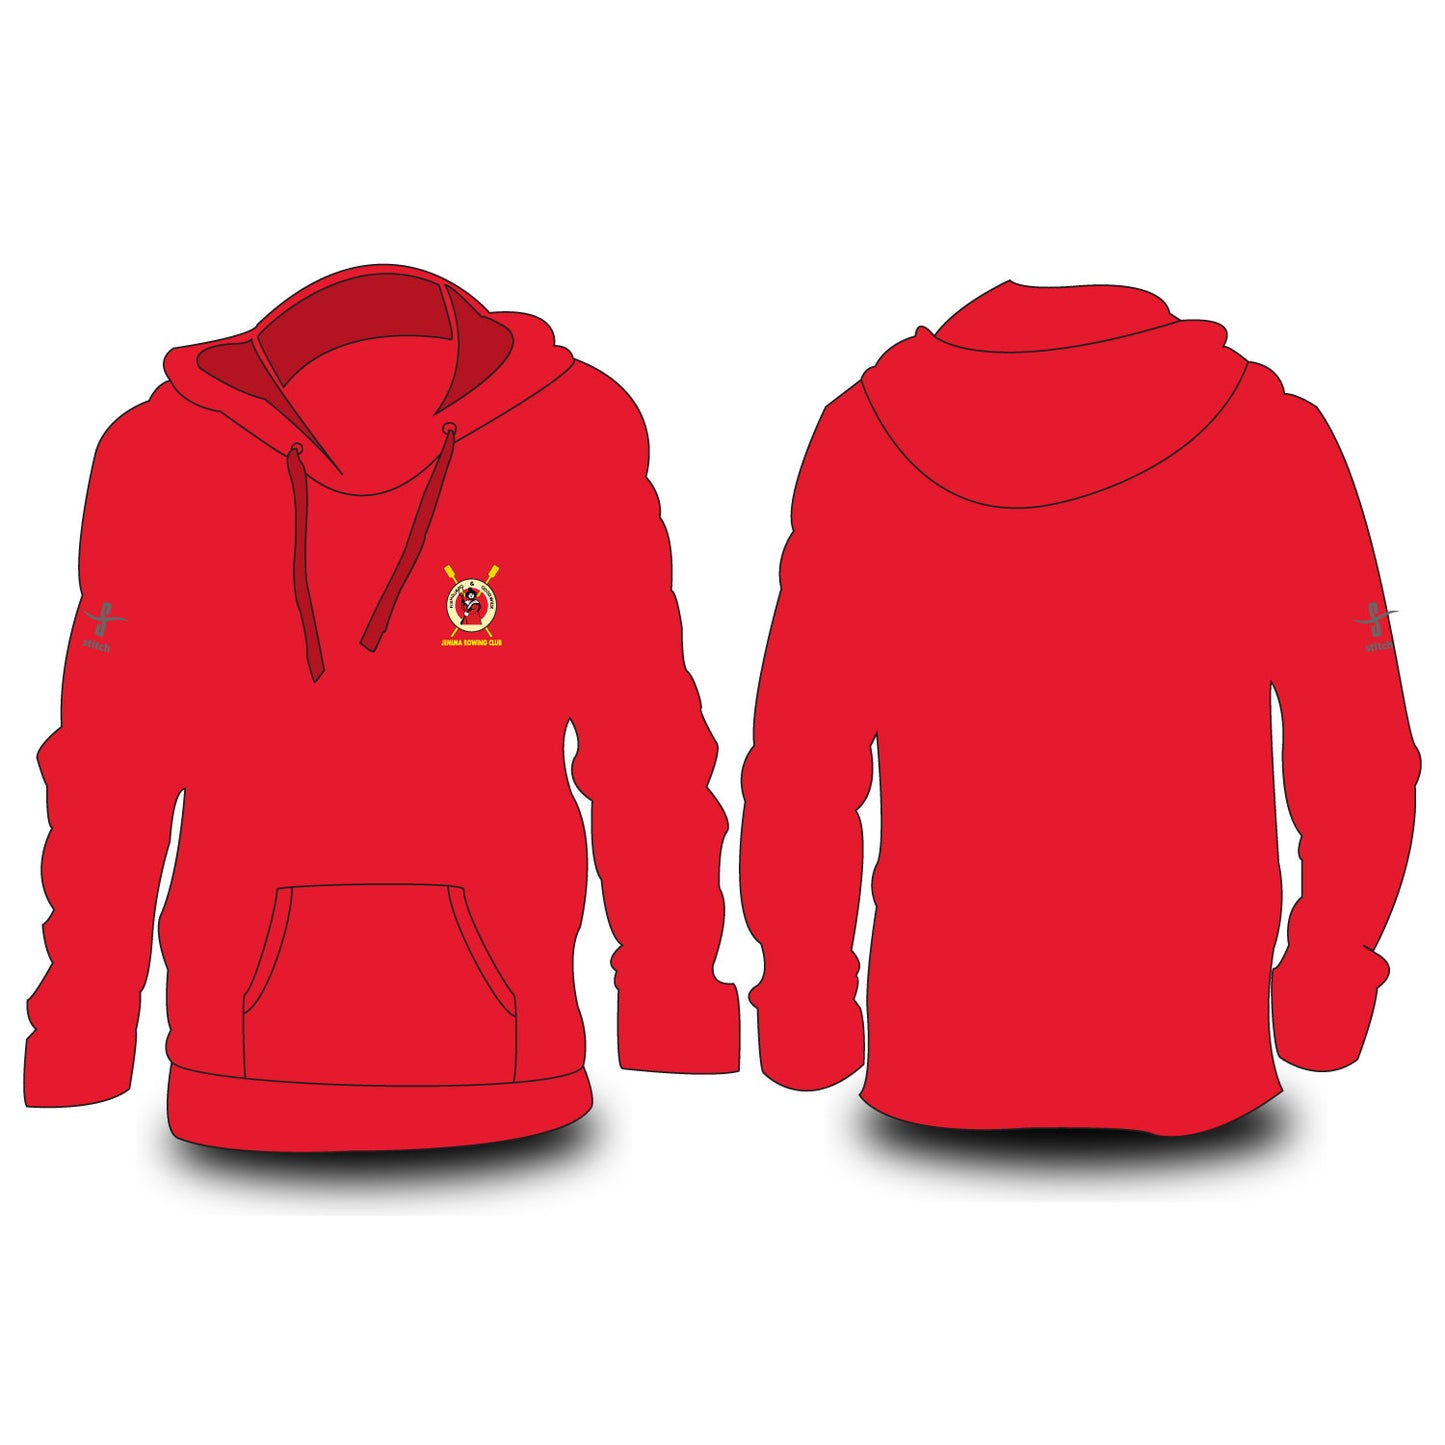 Fishguard and Goodwick Hoodie Red